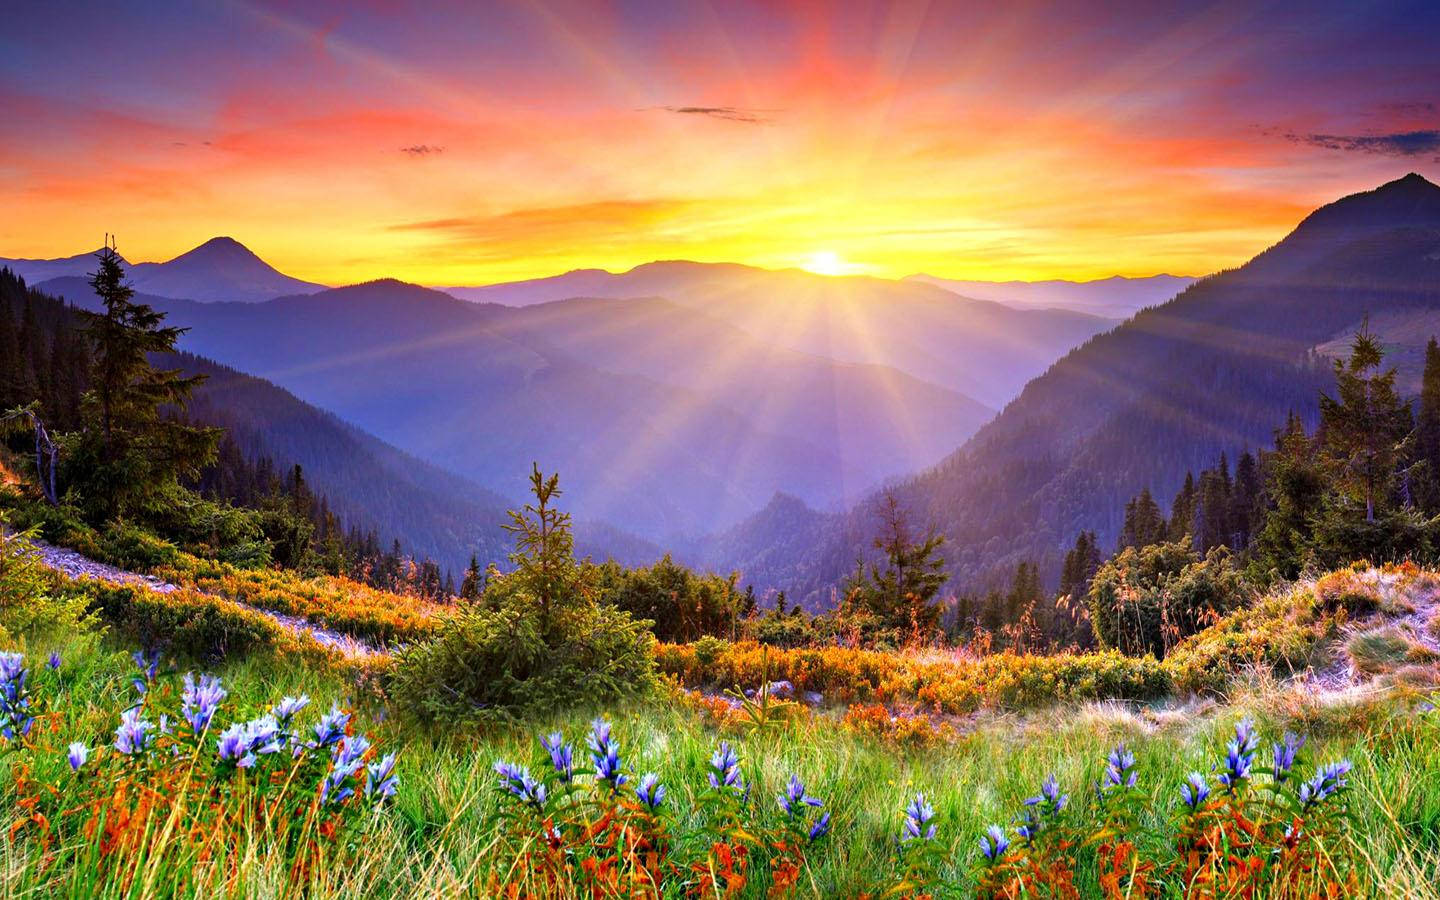 Taking in the Sunrise Over a Majestic Mountain Landscape Wallpaper